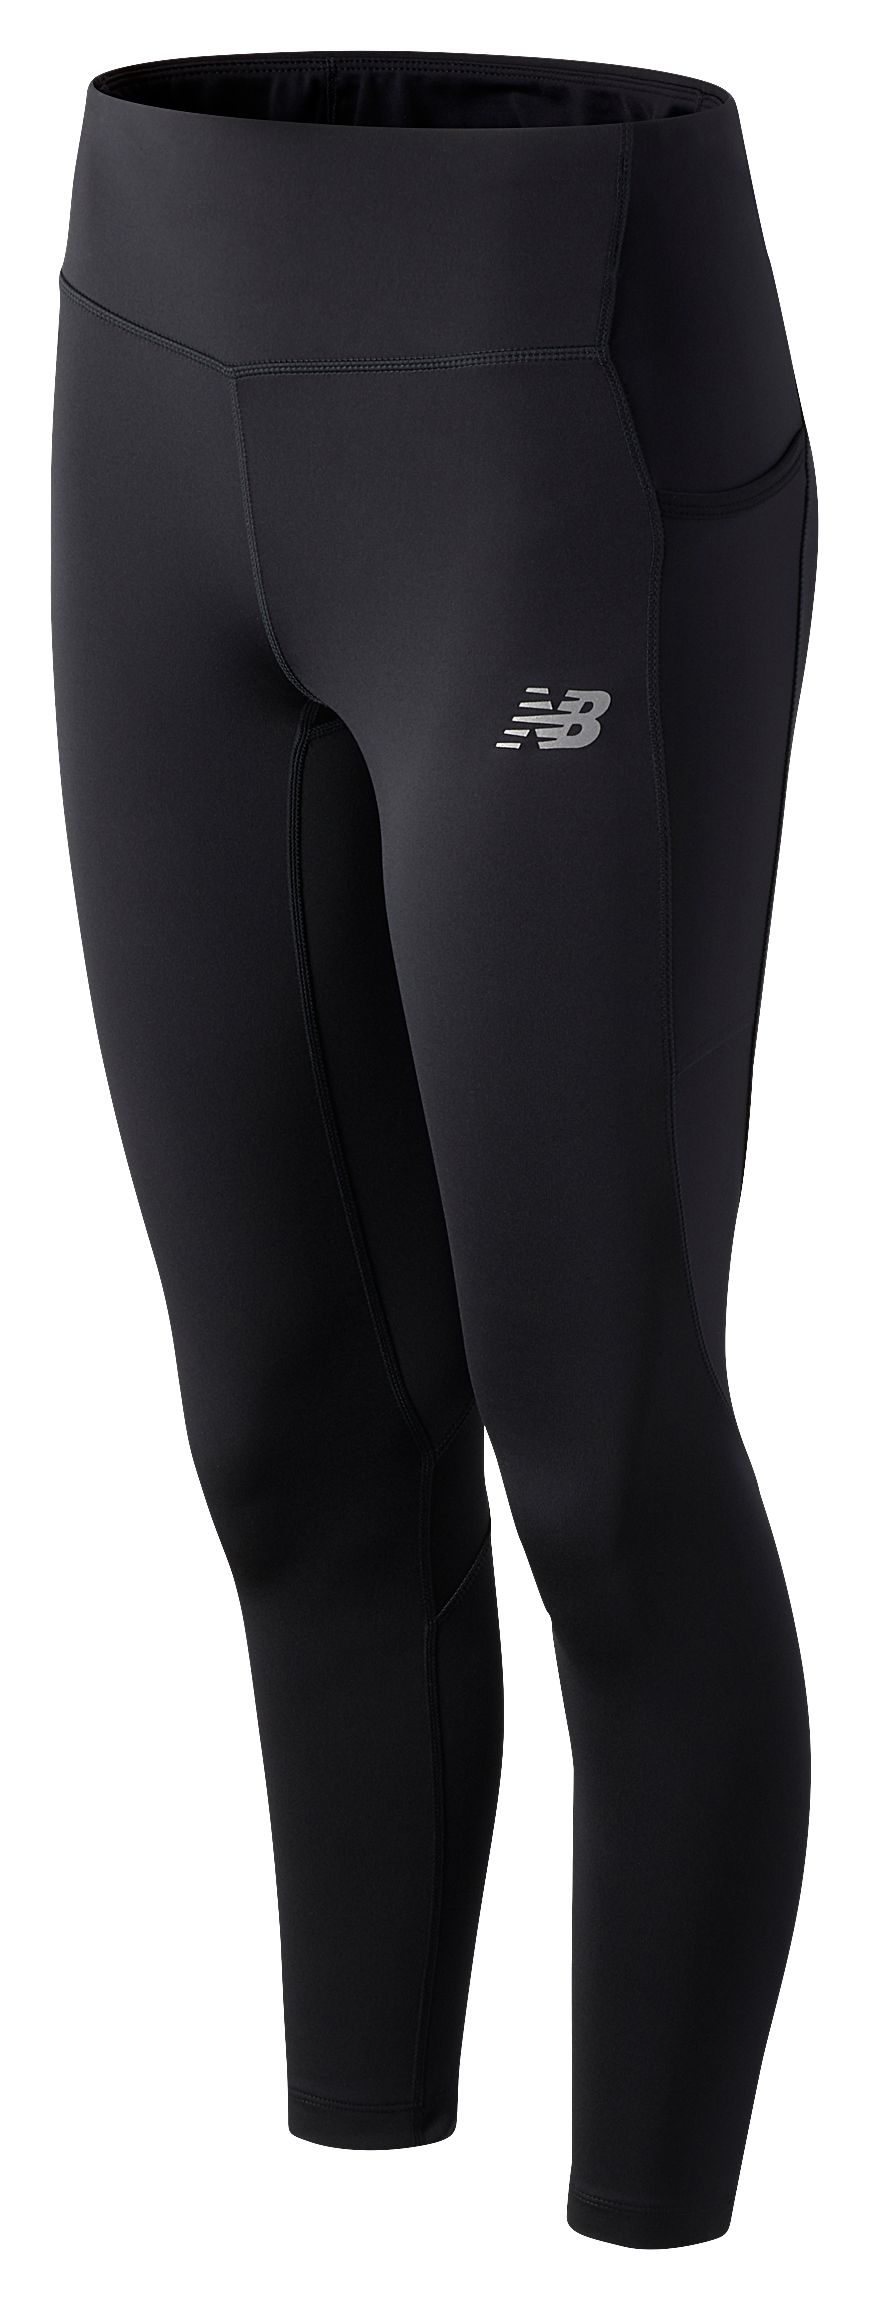 Women's Sports Pants and Tights - New 